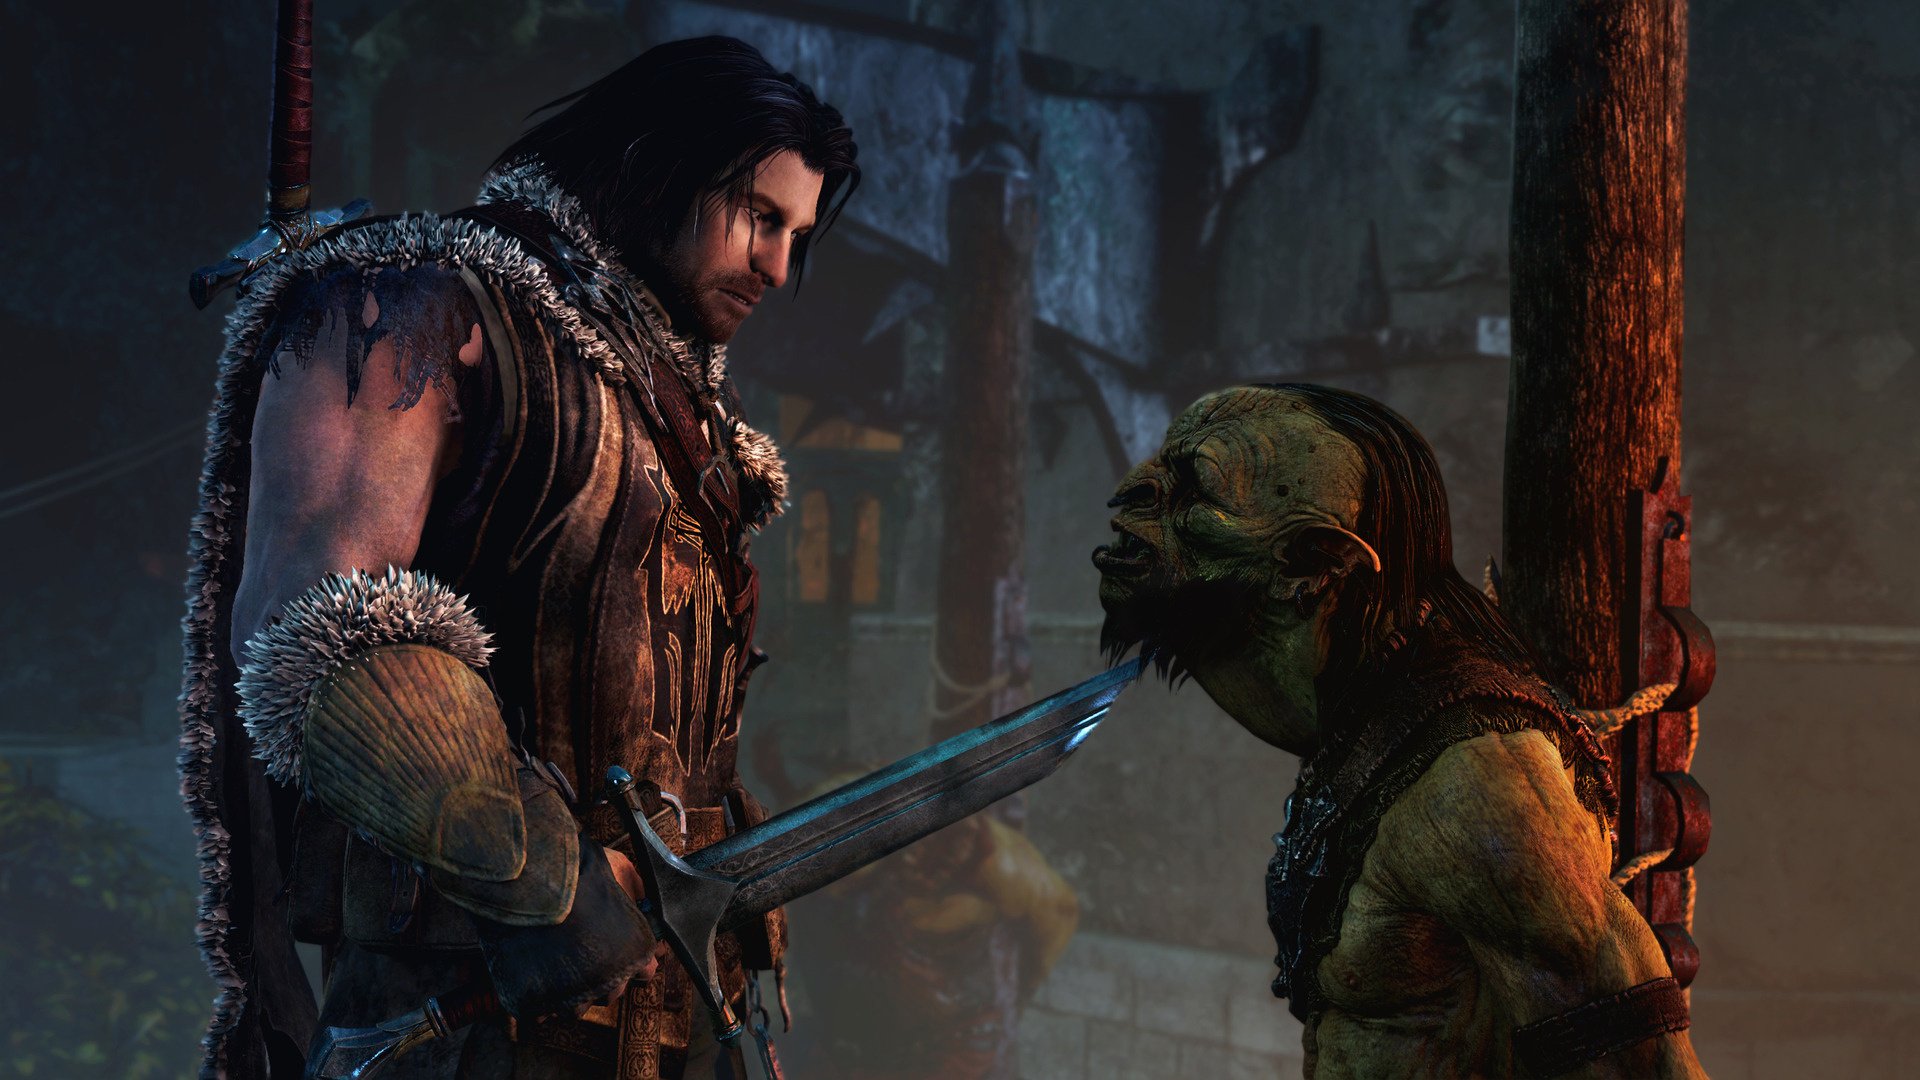 Middle Earth: Shadow of Mordor sequel leaked, set to launch this